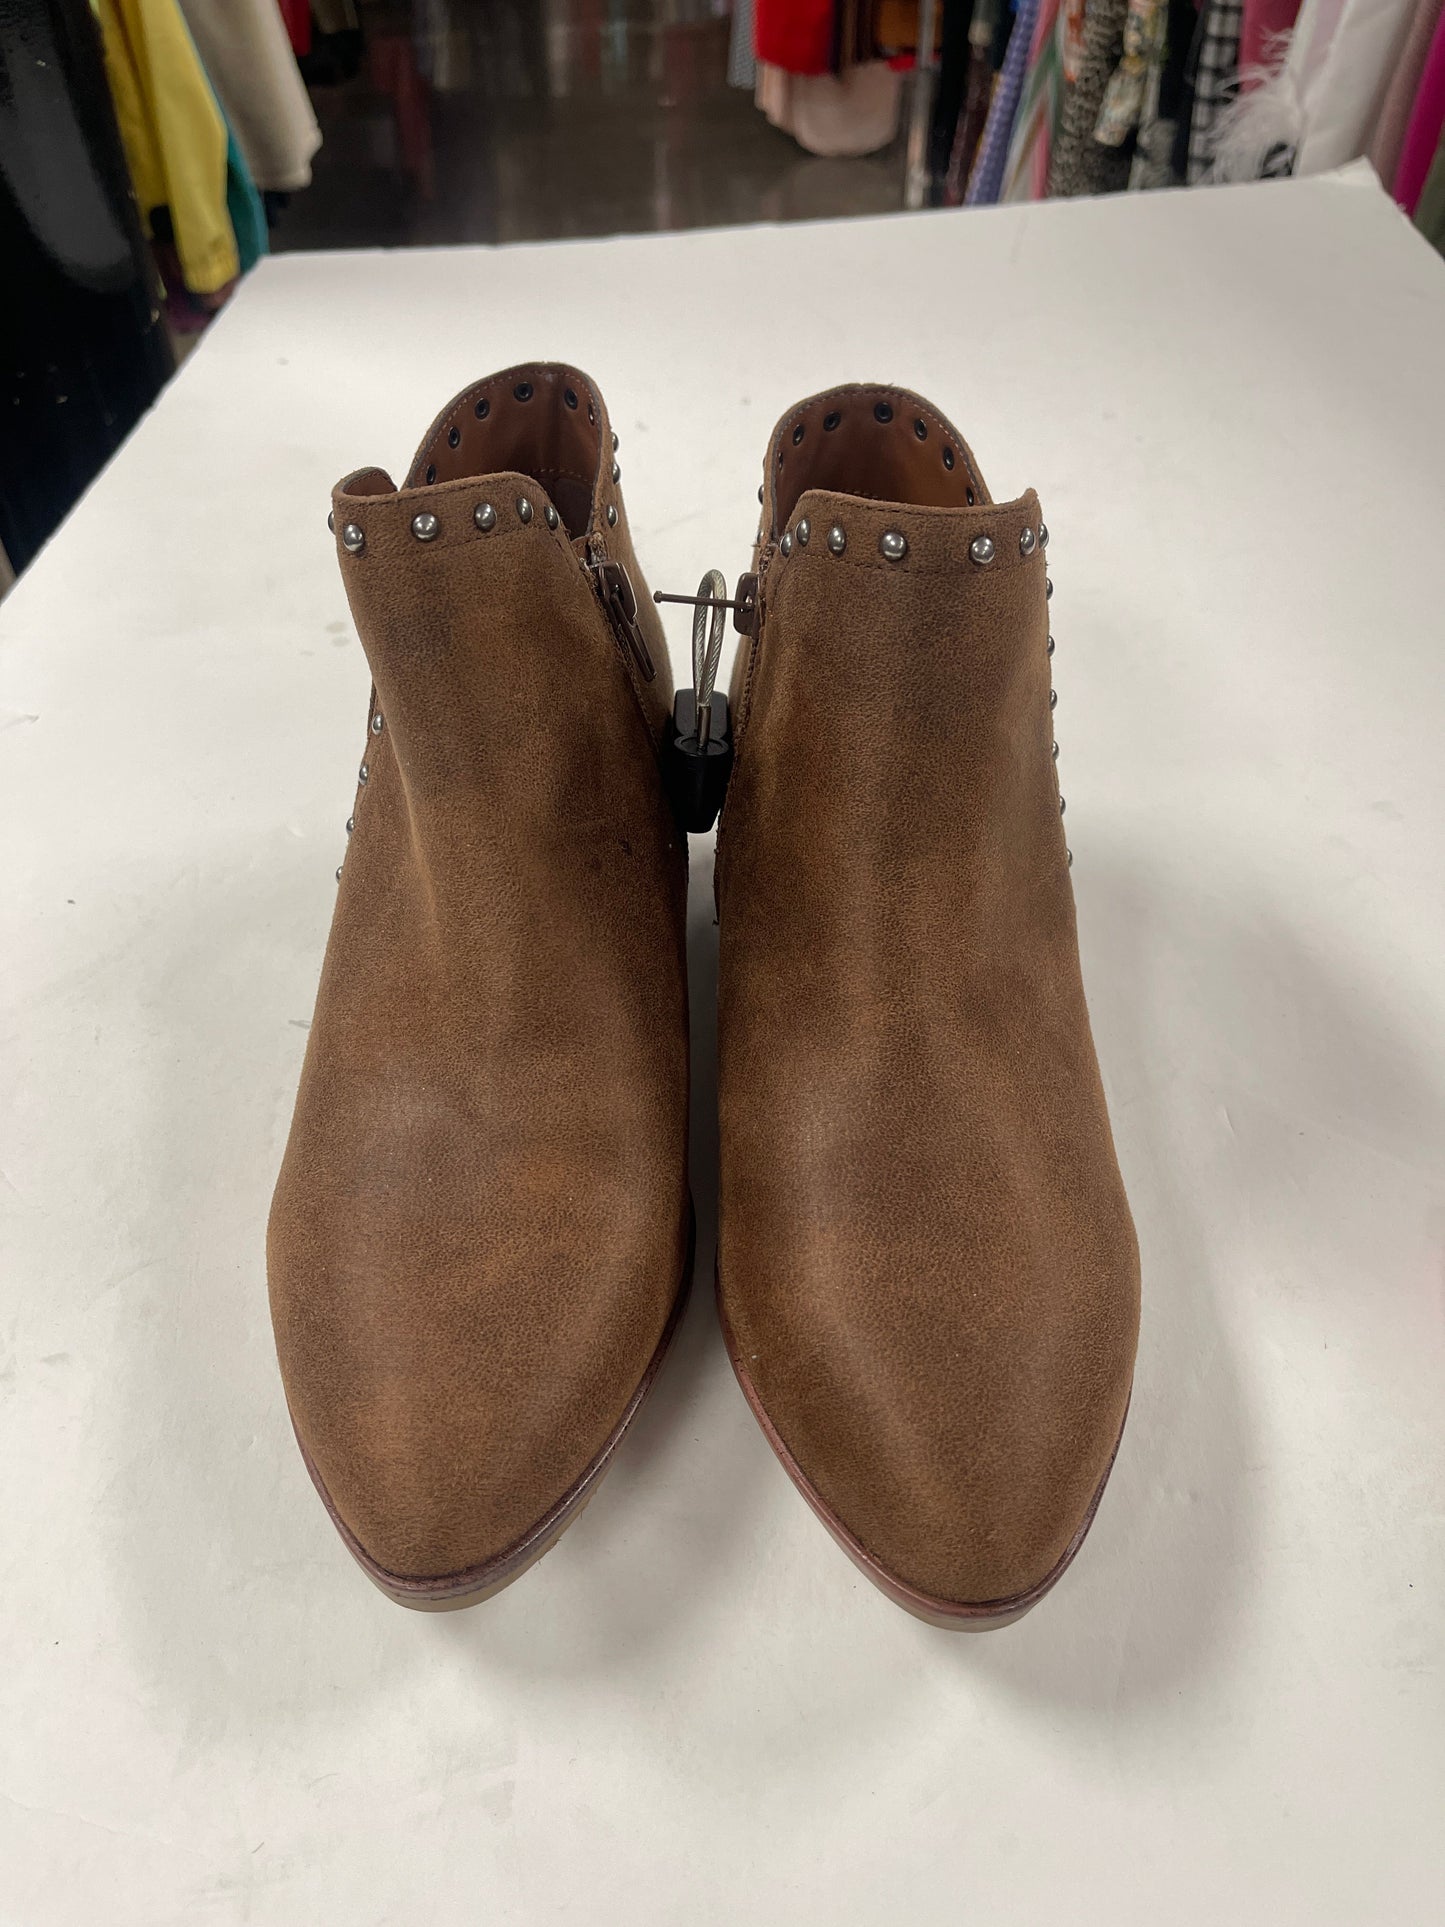 Brown Boots Ankle Flats Mia, Size 8